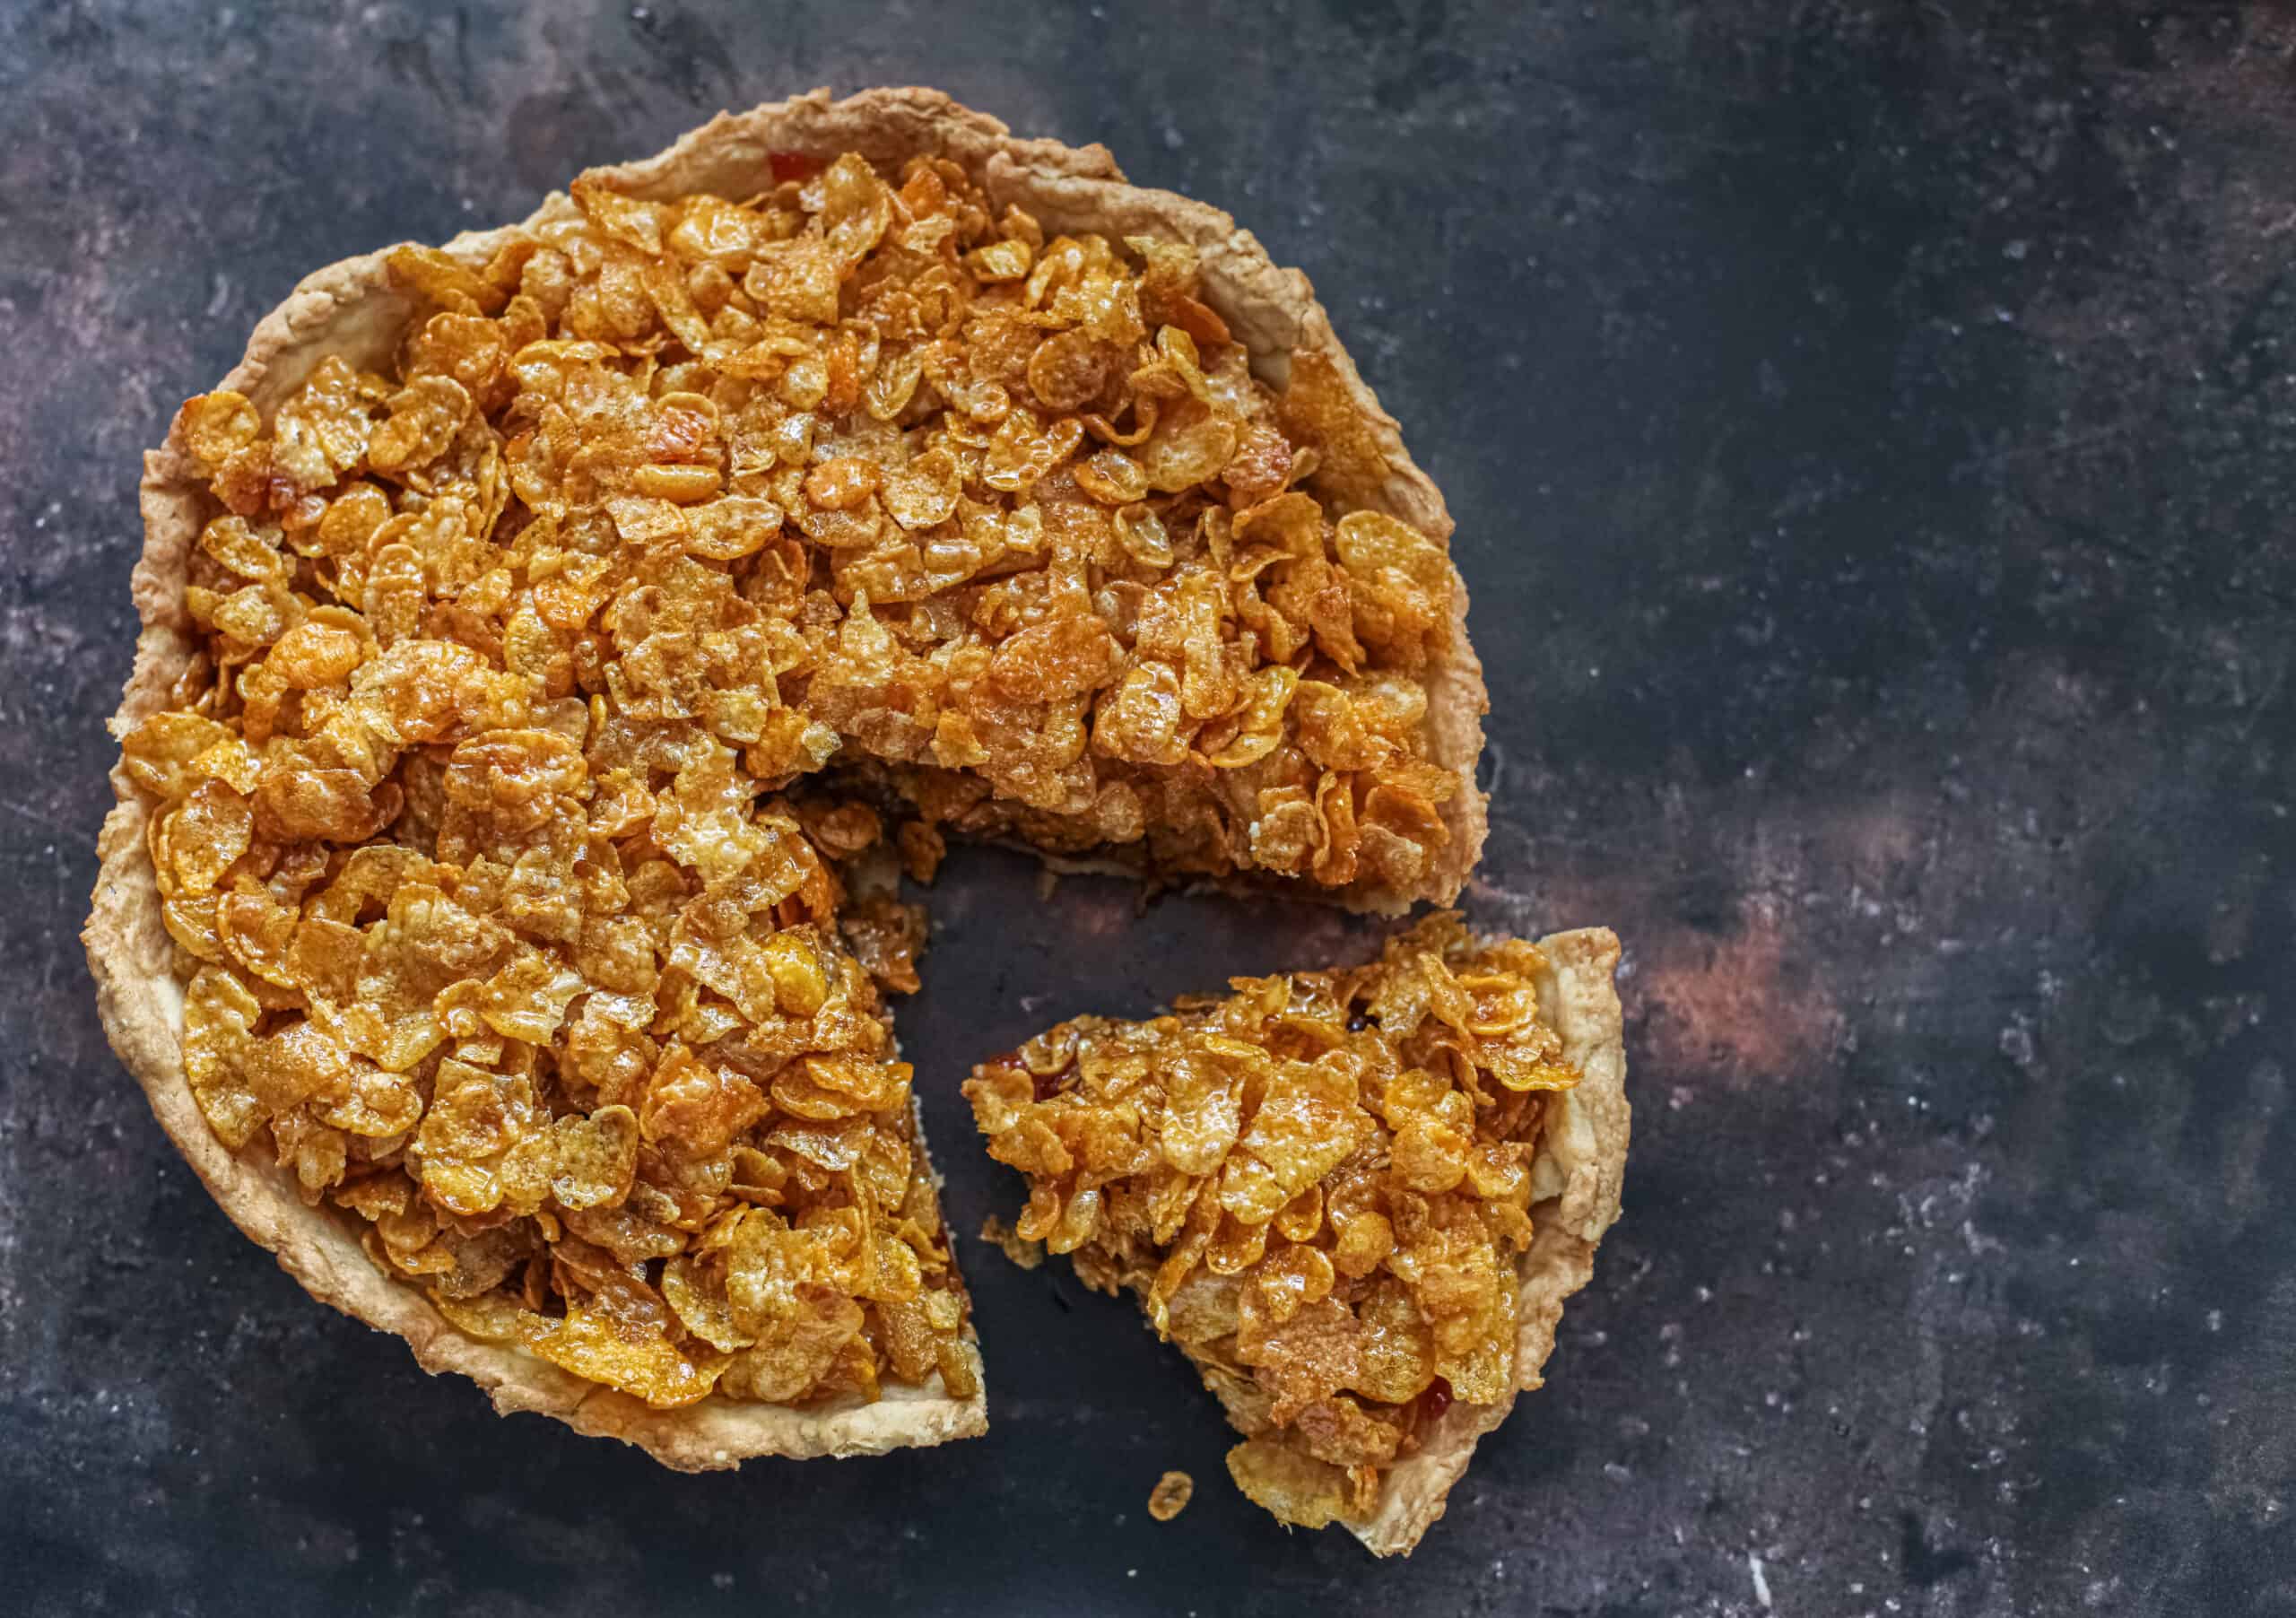 Cornflake tart with a slice cut out.